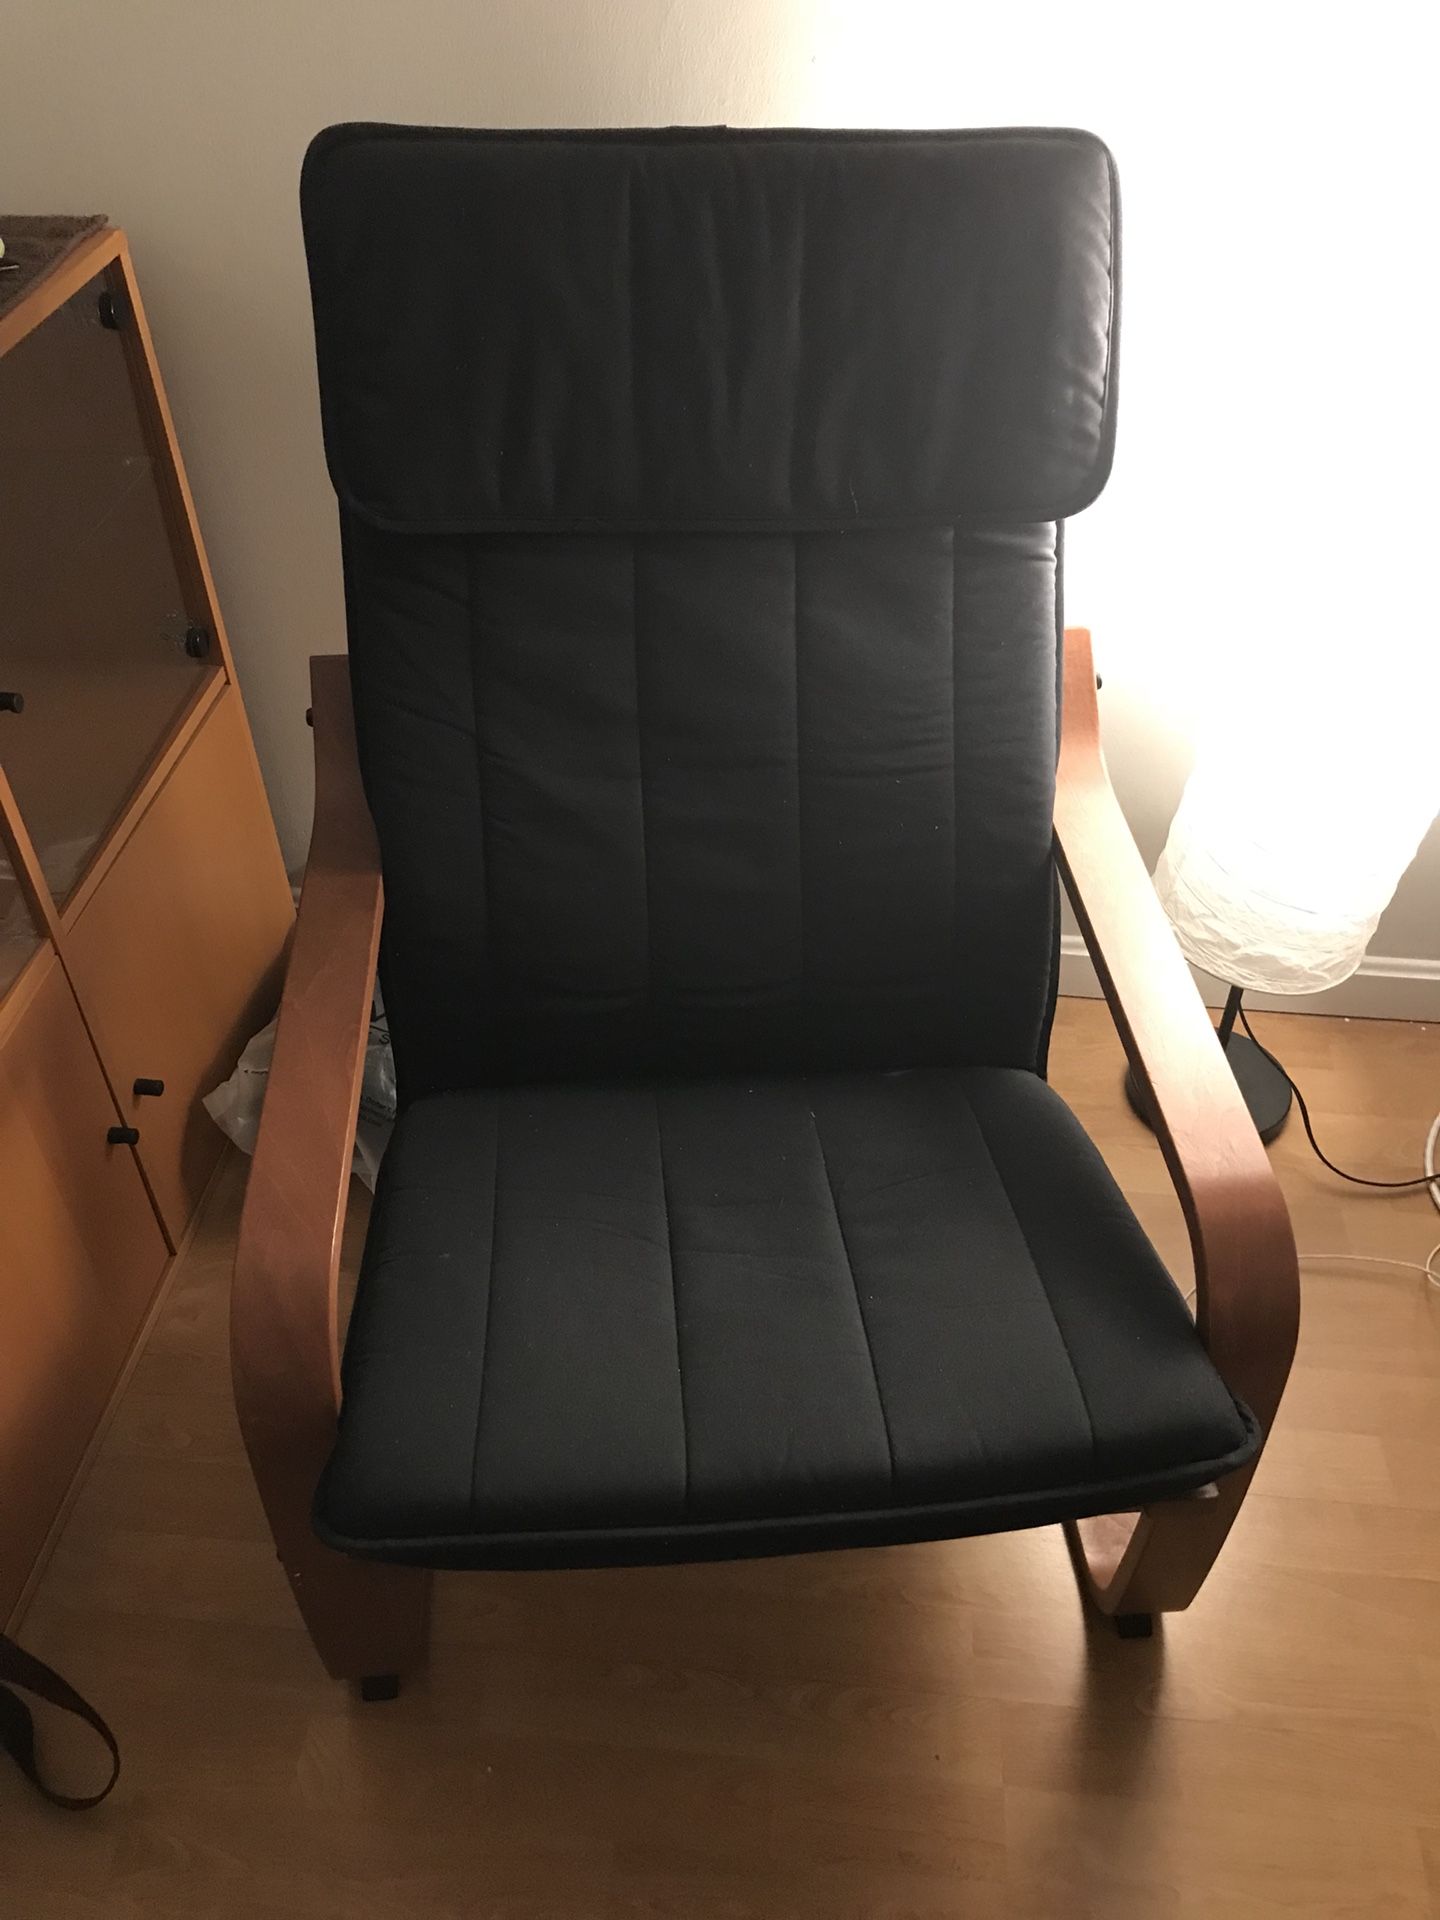 Selling IKEA Sofa Chair in Amazing Condition